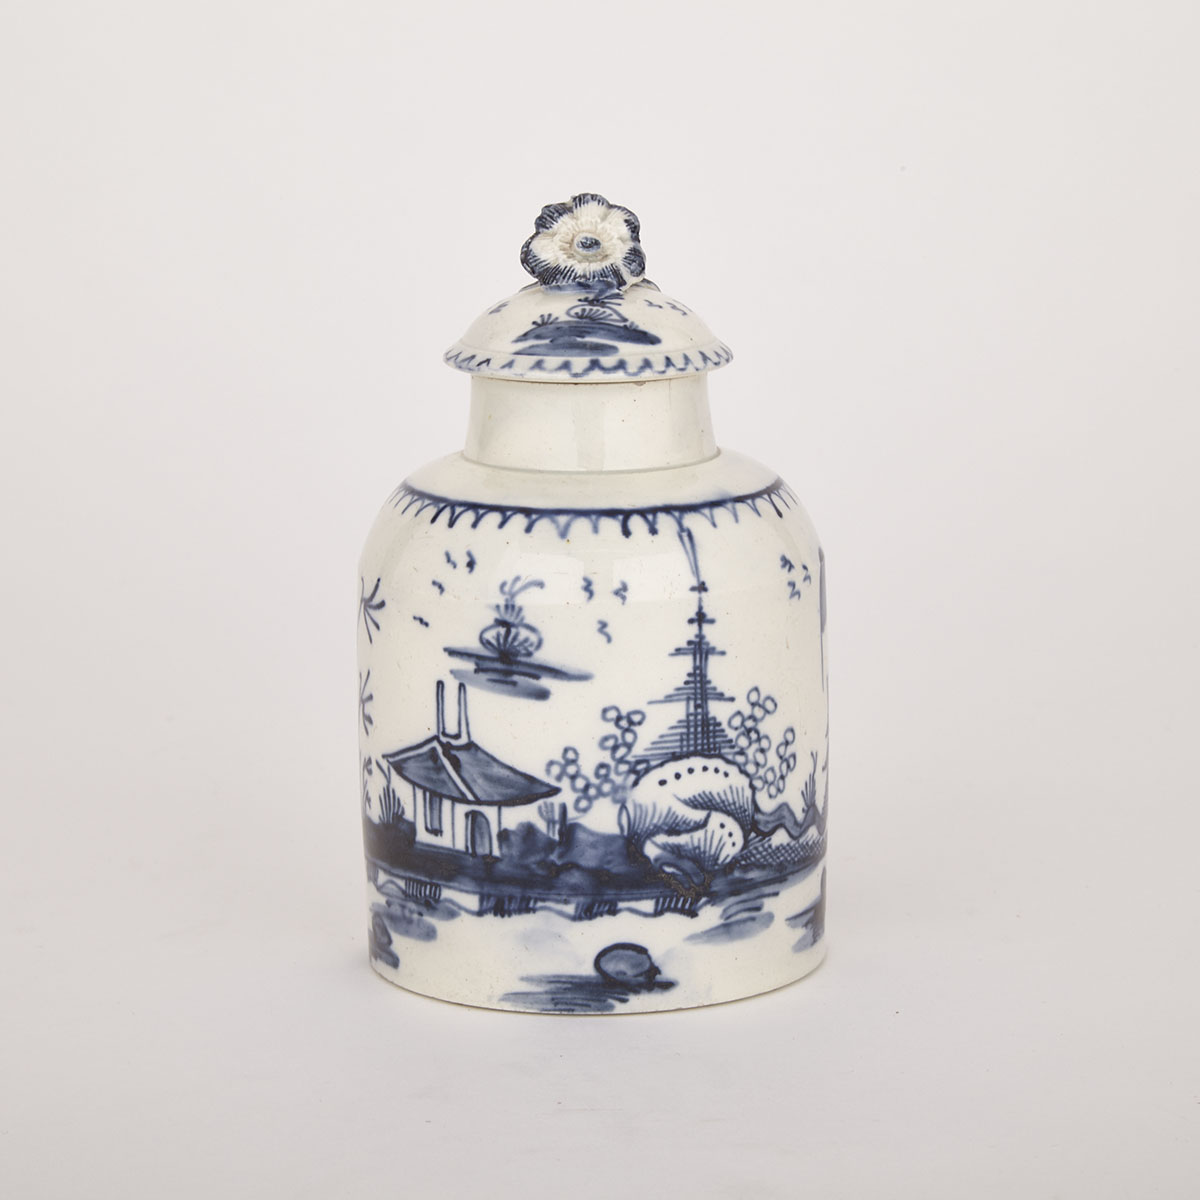 English Pearlware Tea Caddy and Cover, late 18th century